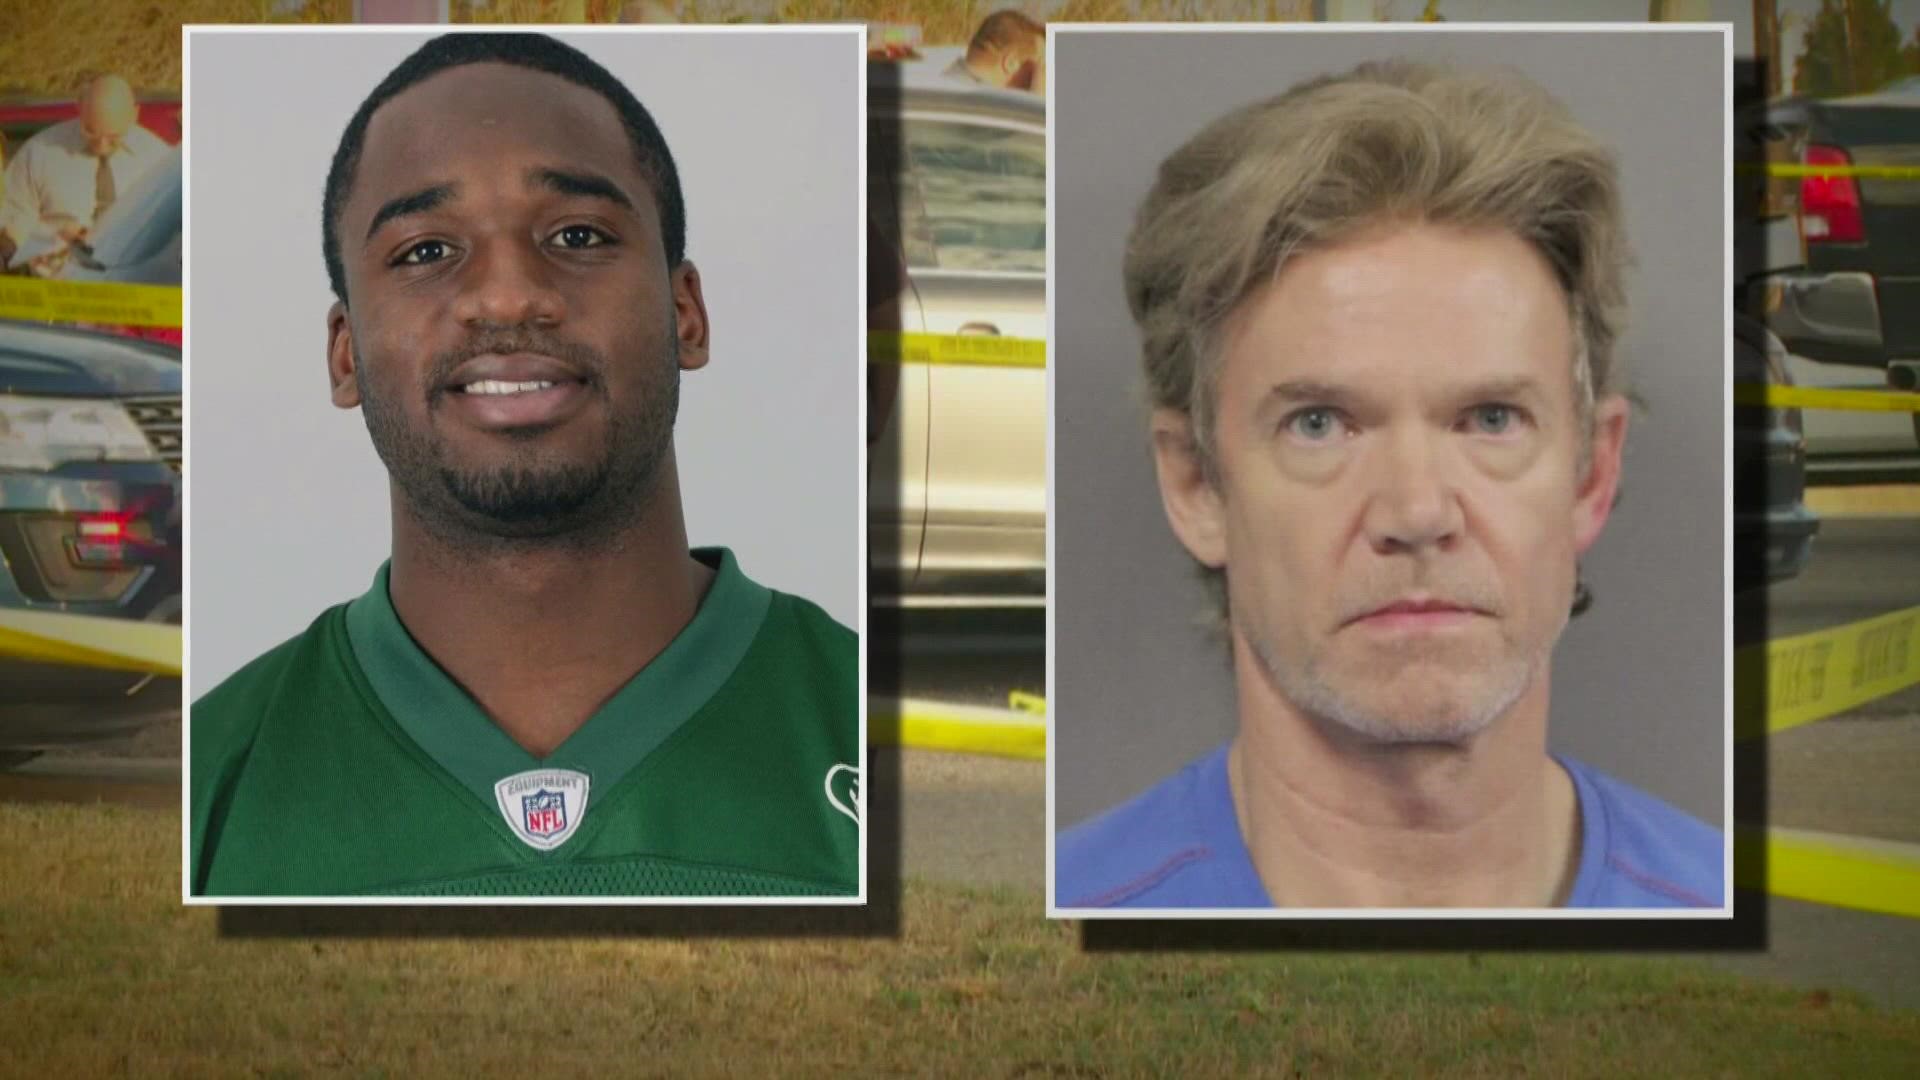 The man who killed a former NFL player in a road rage incident may be tried again for murder after his conviction on a lesser charge was overturned.